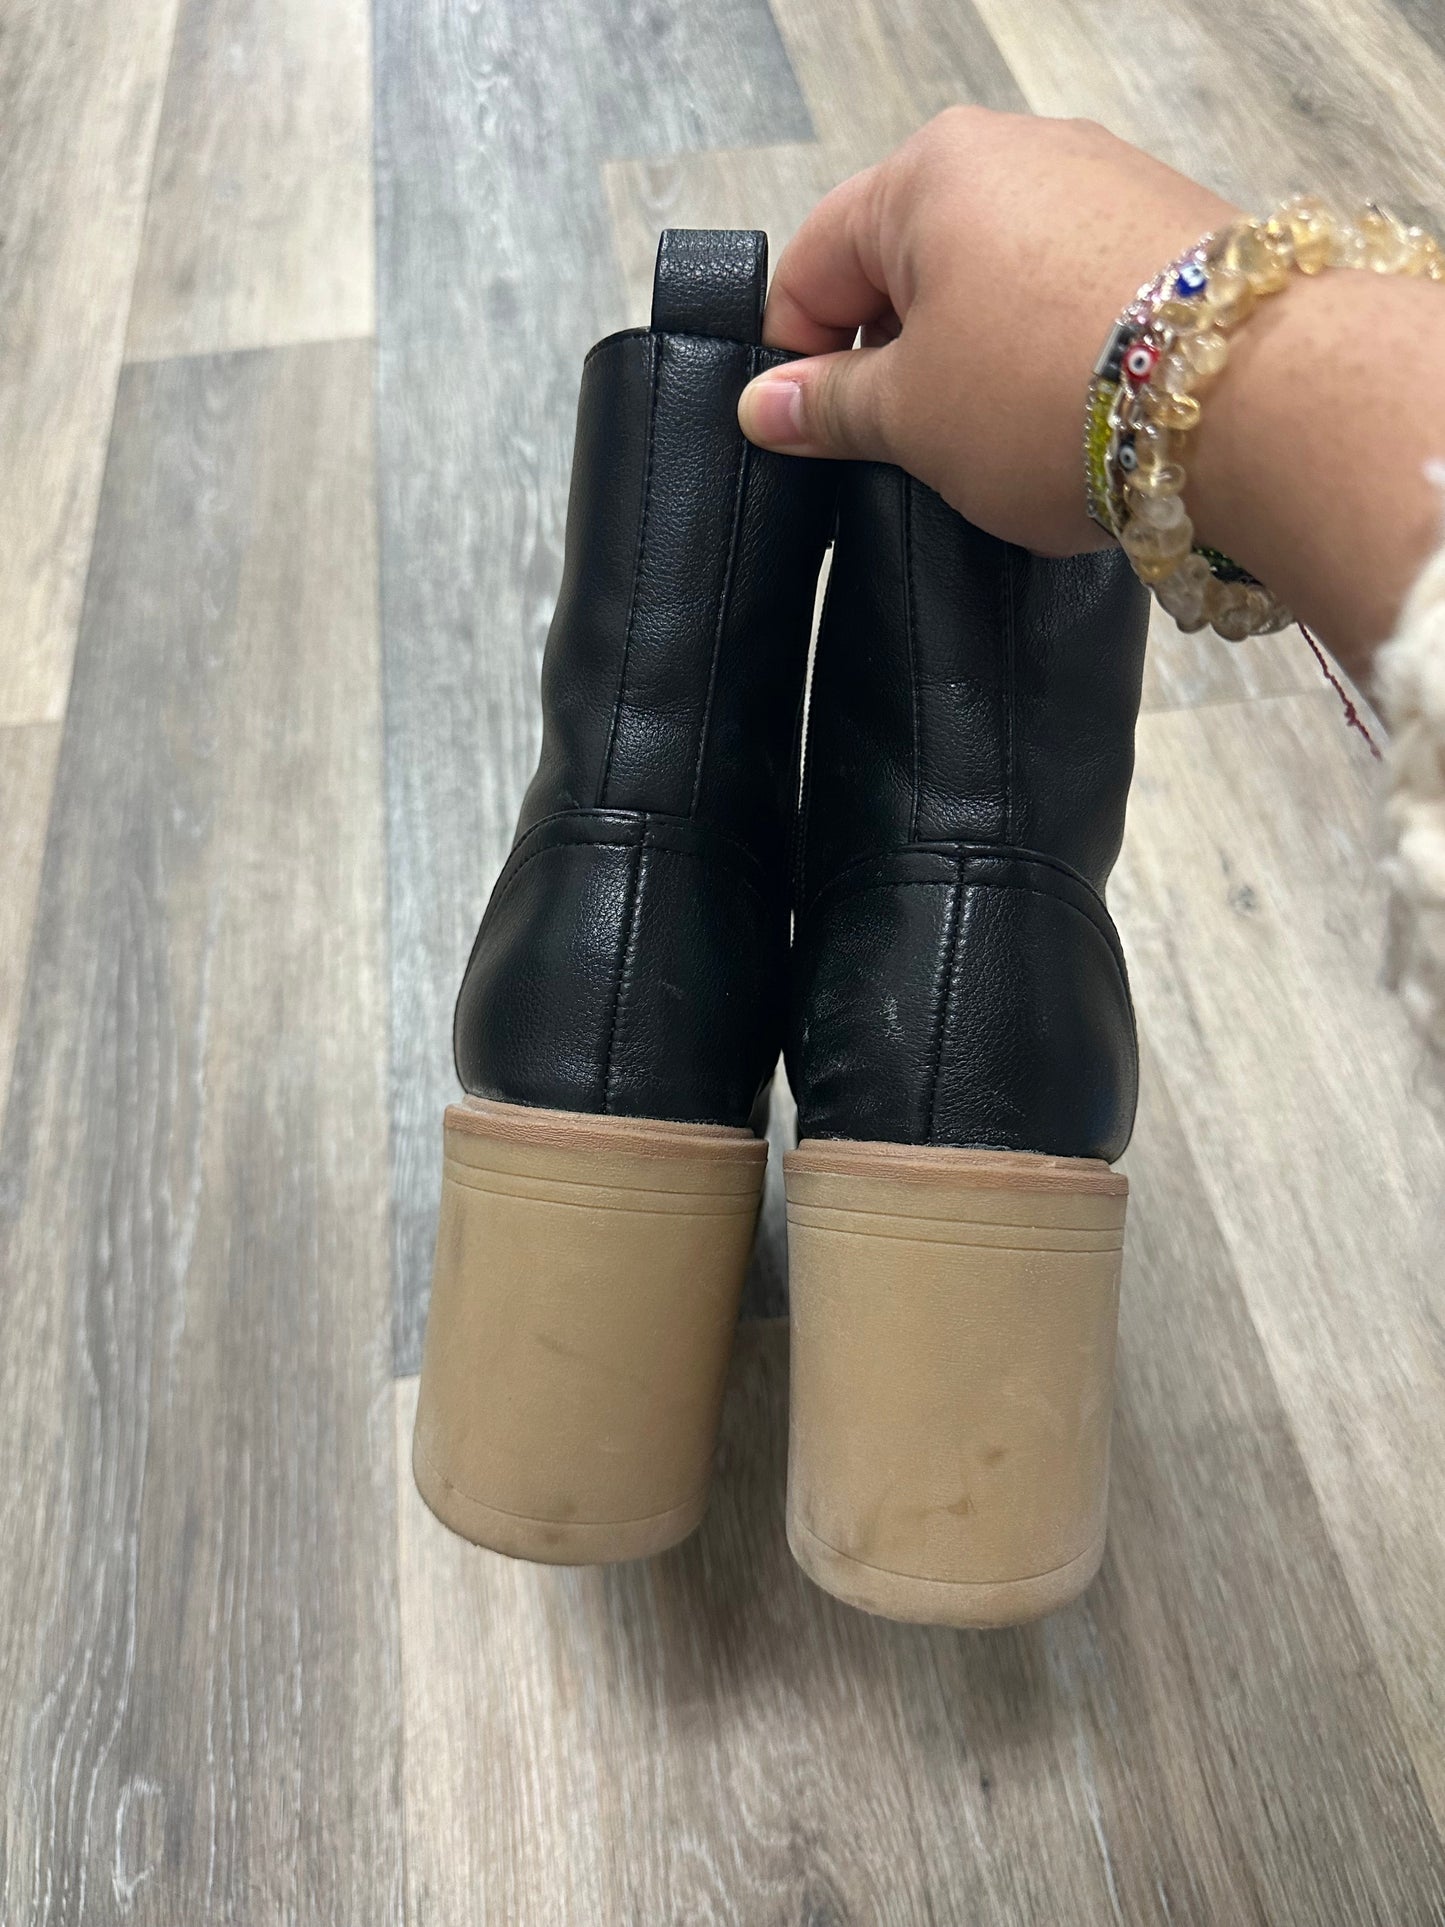 Boots Ankle Heels By Dolce Vita  Size: 9.5